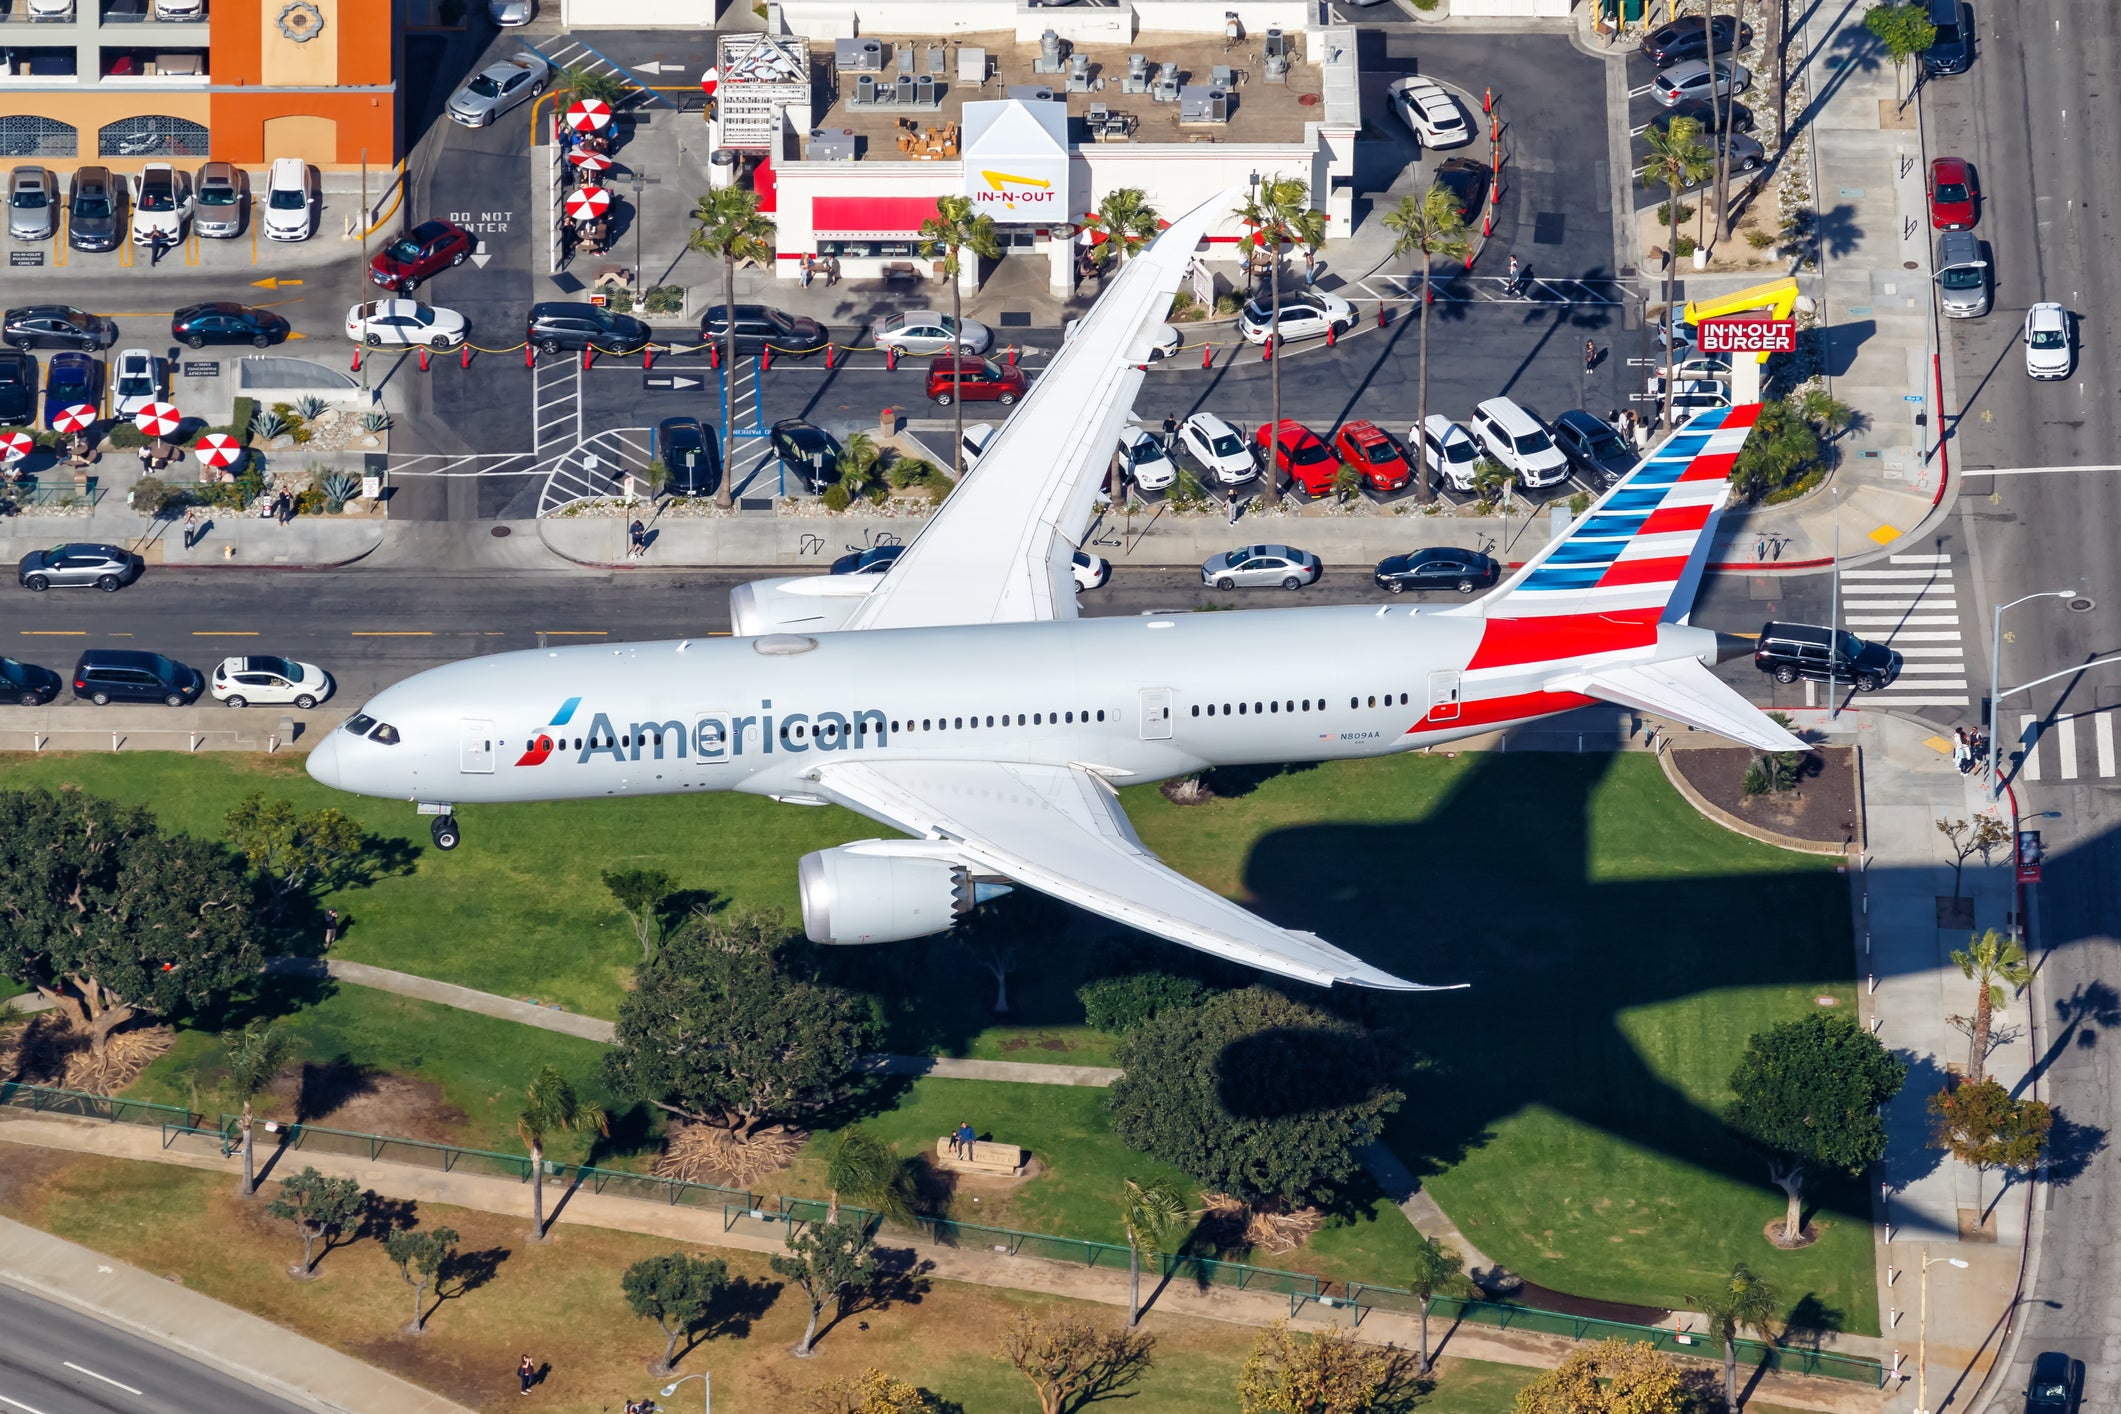 The incident occured onboard an American Airlines flight after it left the Dominican Republic